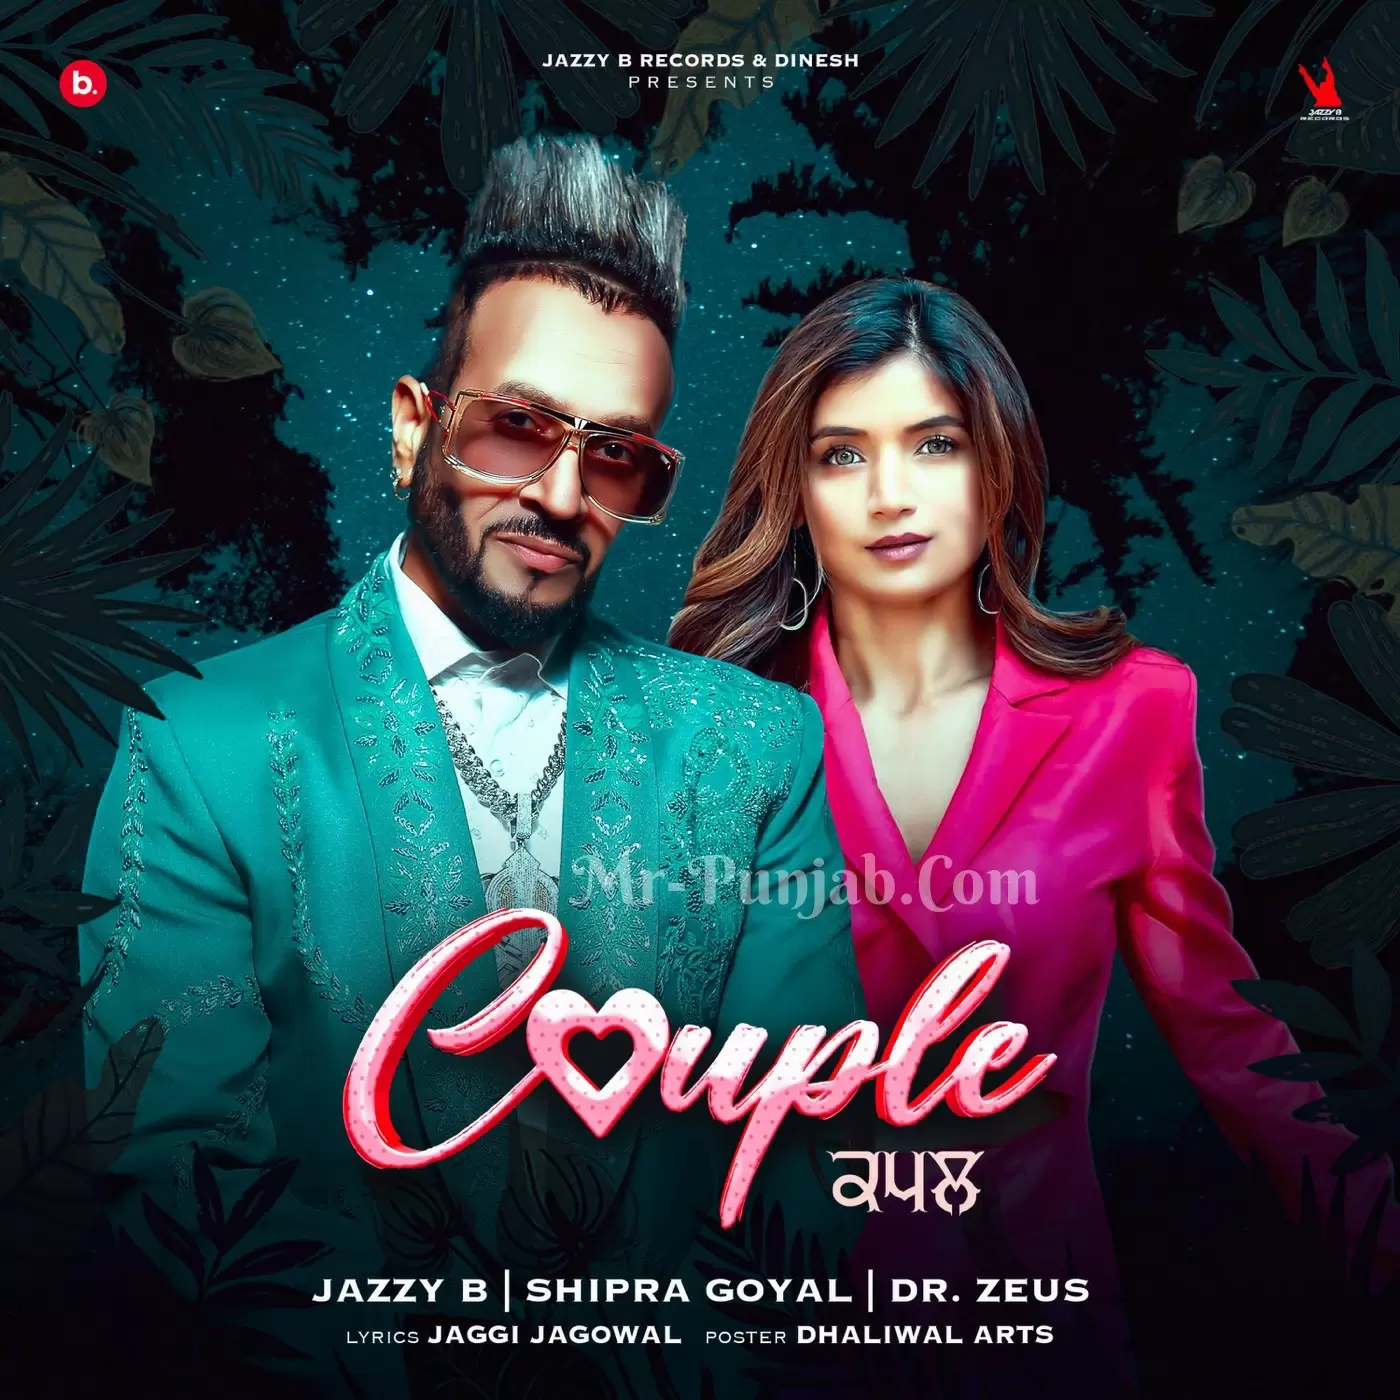 Couple Jazzy B Mp3 Download Song - Mr-Punjab